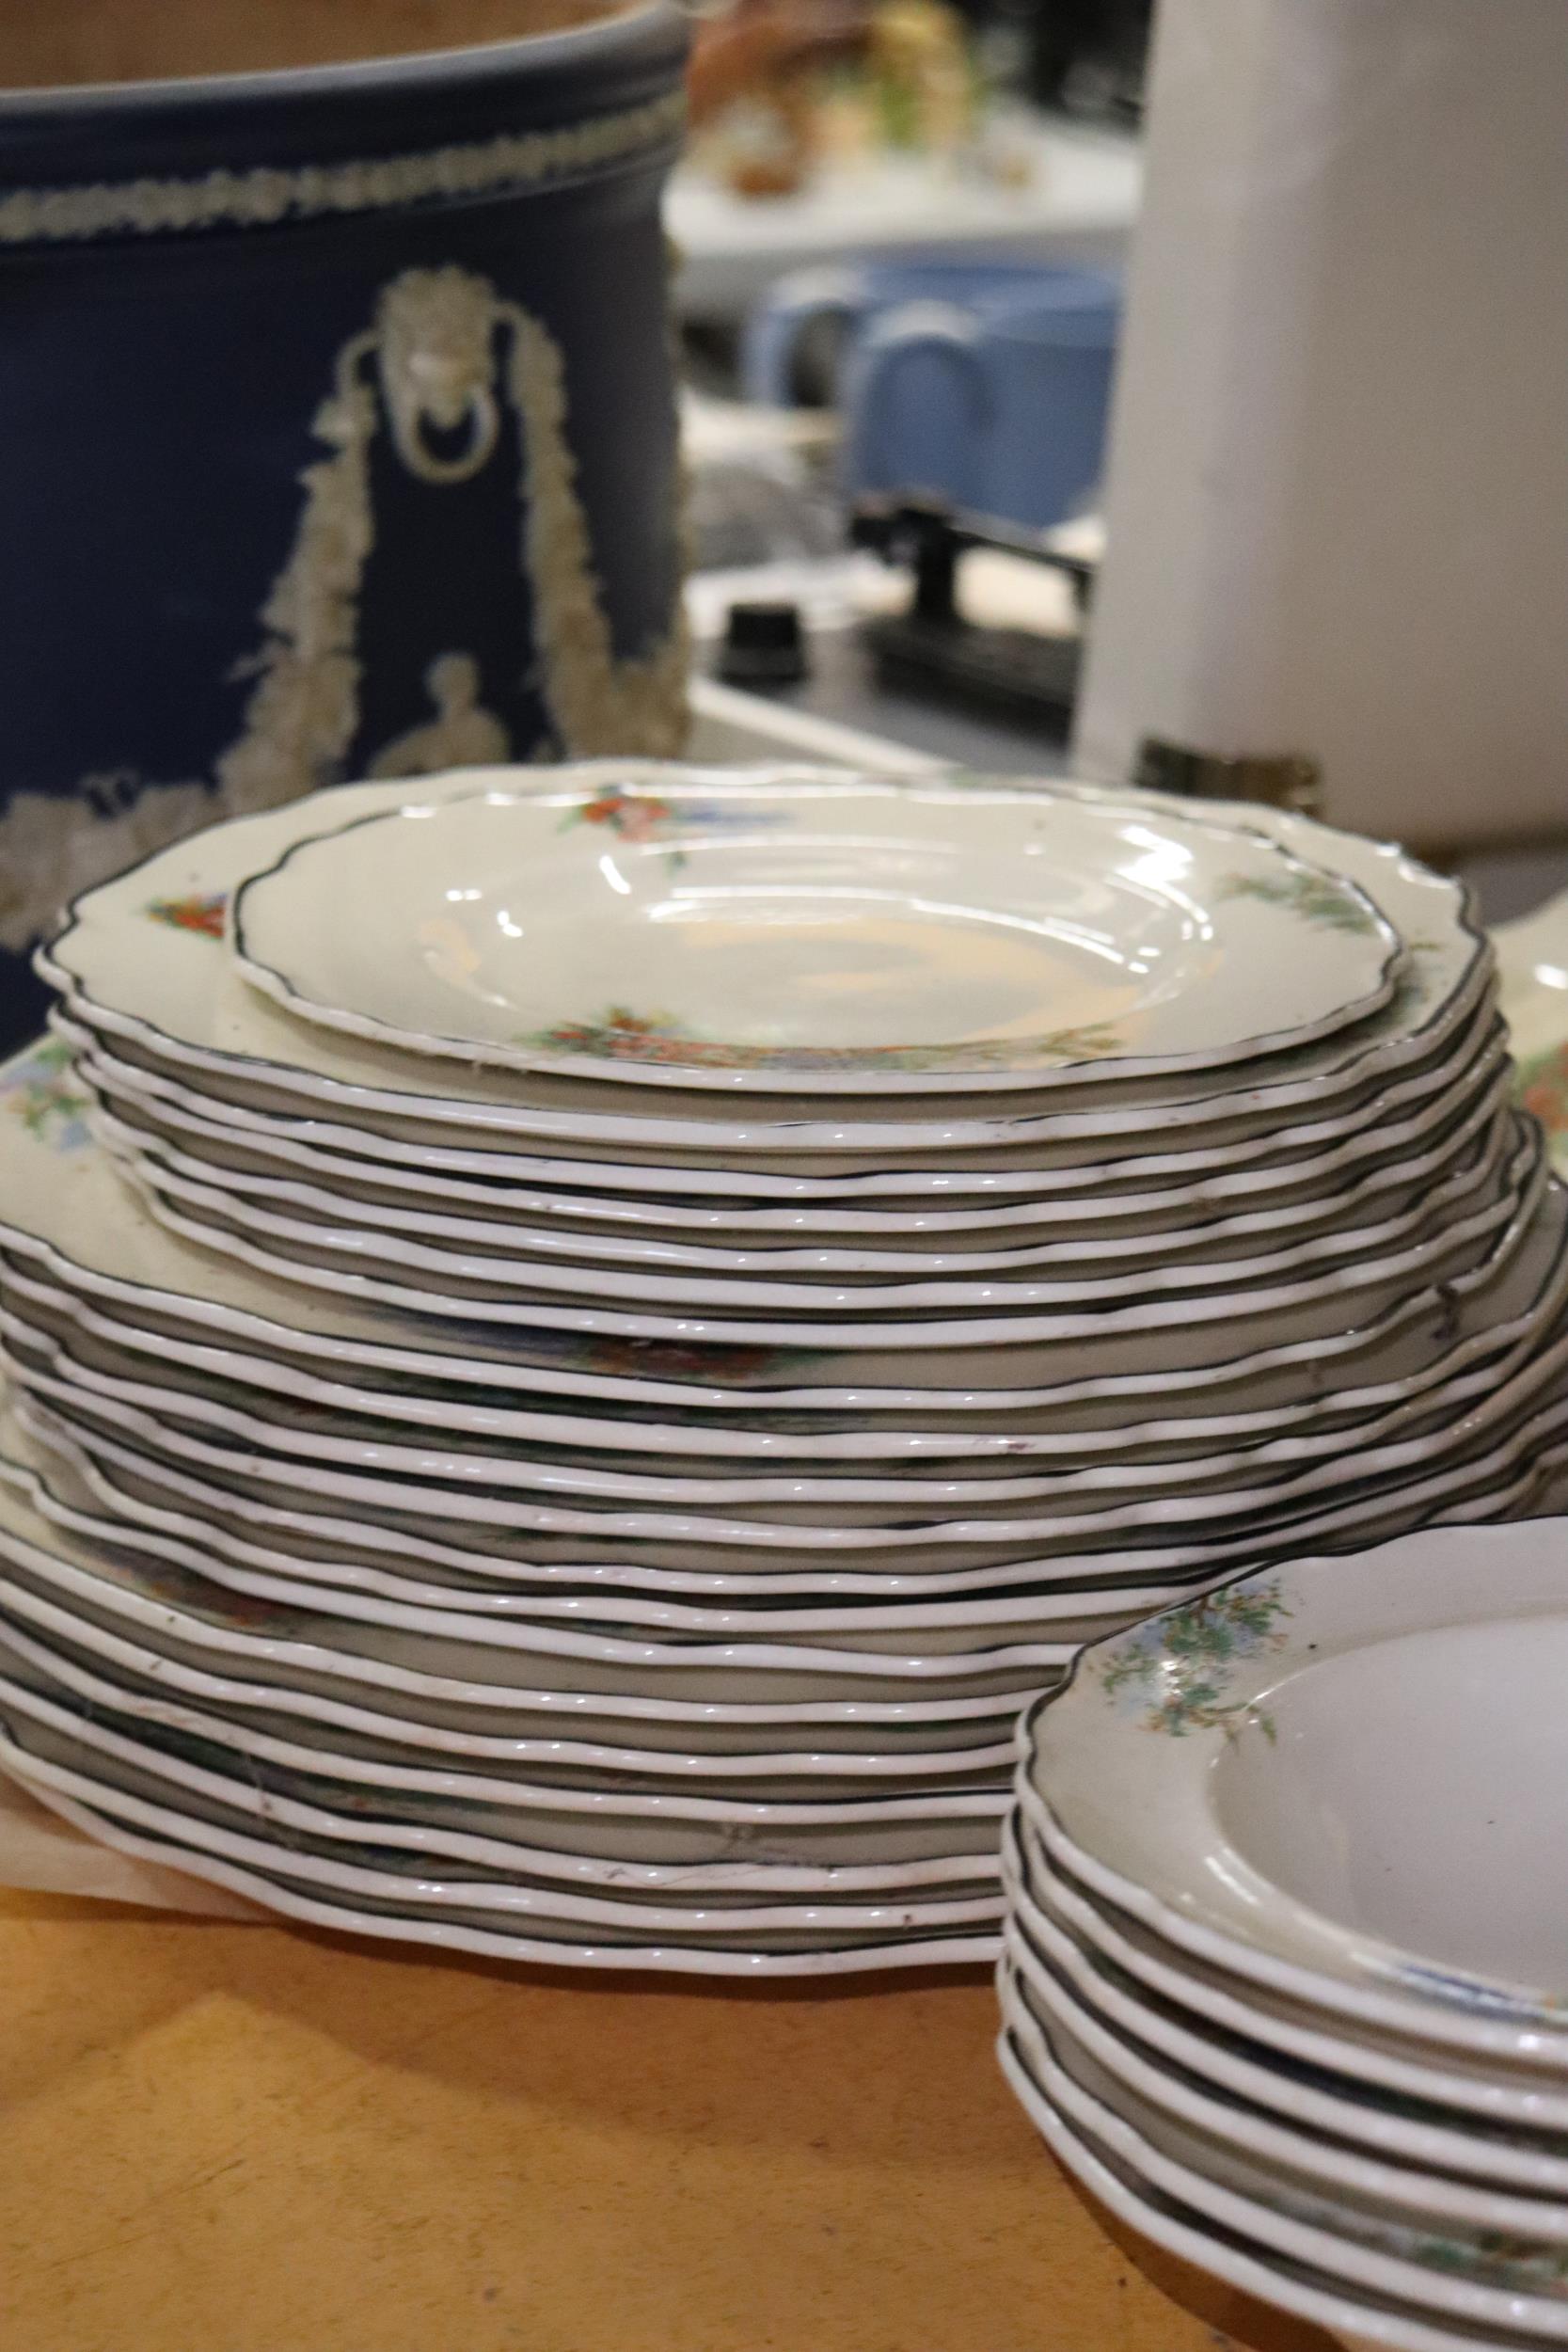 A MYOTT STAFFORDSHIRE DINNER SERVICE TO INCLUDE TUREENS, BOWLS, SAUCE BOAT, PLATES, ETC., - Image 8 of 10